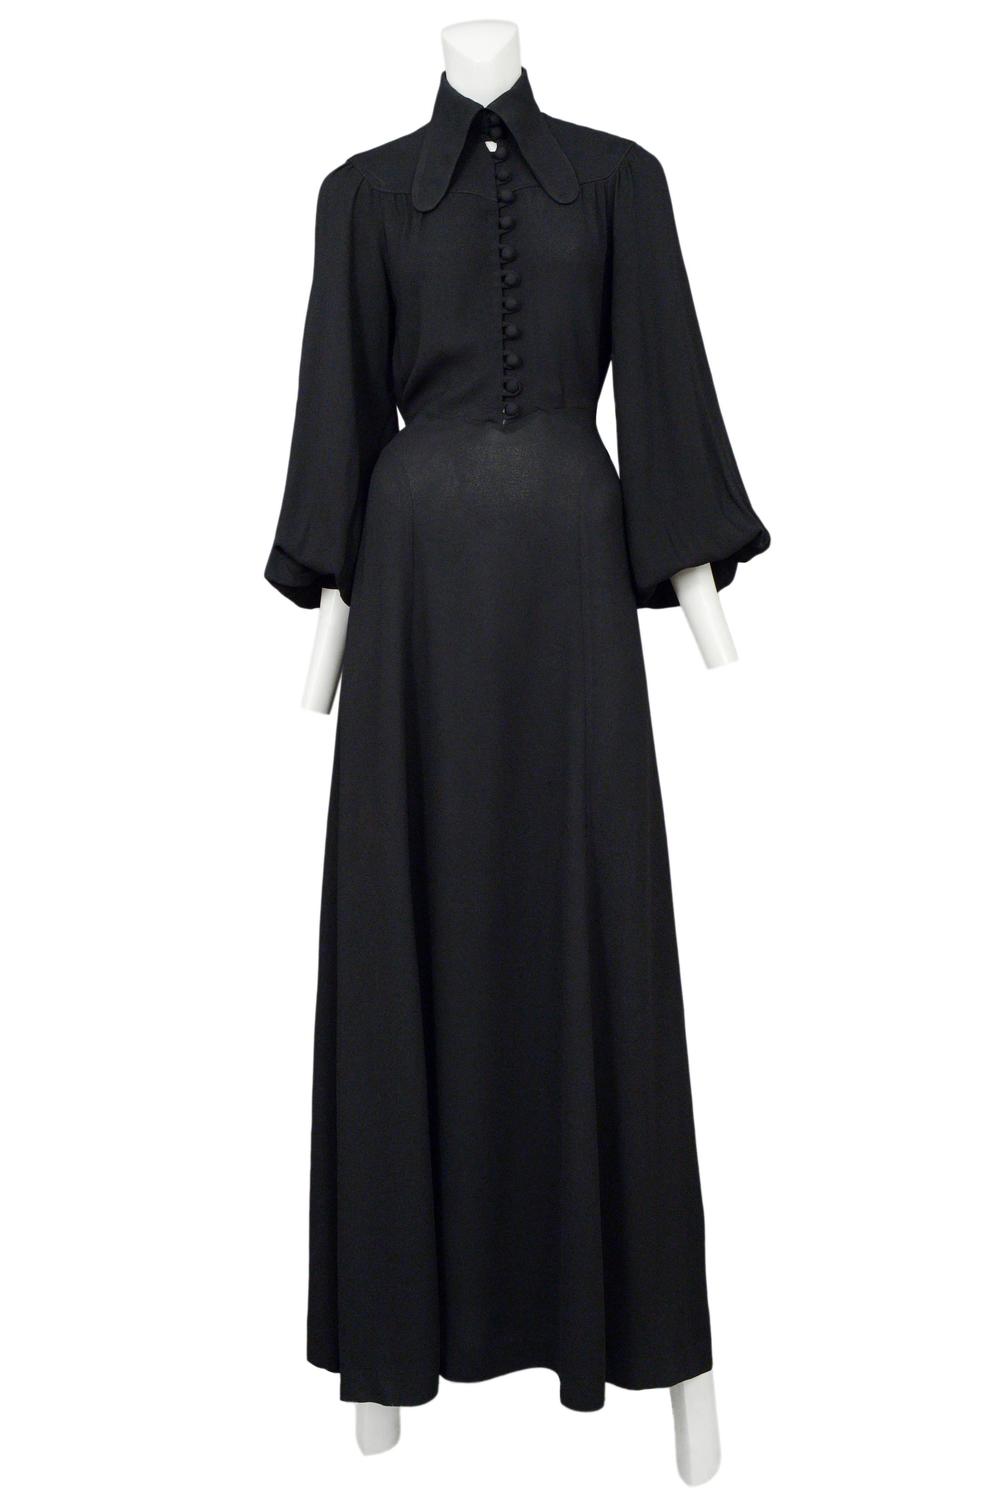 Ossie Clark Black Crepe Gown For Sale at 1stdibs